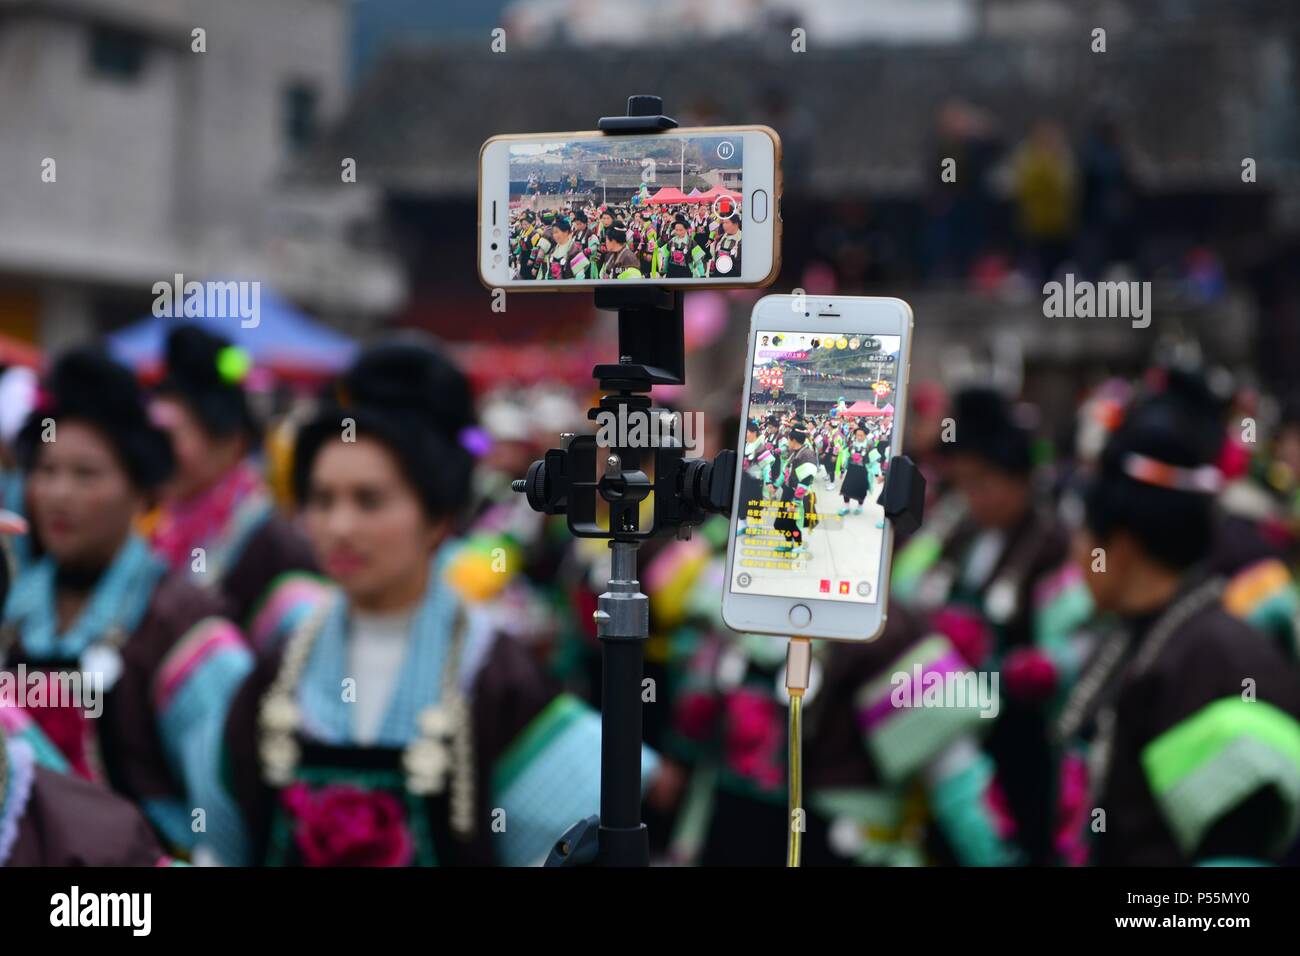 (180625) -- BEIJING, June 25, 2018 (Xinhua) -- Photo taken on Feb. 20, 2018 shows a mobile phone live broadcast of a Spring Festival celebration event in Jiumen Village of Danzhai County, southwest China's Guizhou Province. For most Chinese in the 1970s, one of their dreams was to own 'three wheeled things and one vocal thing' which, namely, were a bicycle, a sewing machine, a watch and a radio. By and large, this dream became easily accessible during the 1980s and the 1990s, and 'the big four' were replaced by TV set, refrigerator, washing machine and tape recorder. With people's ever-growi Stock Photo